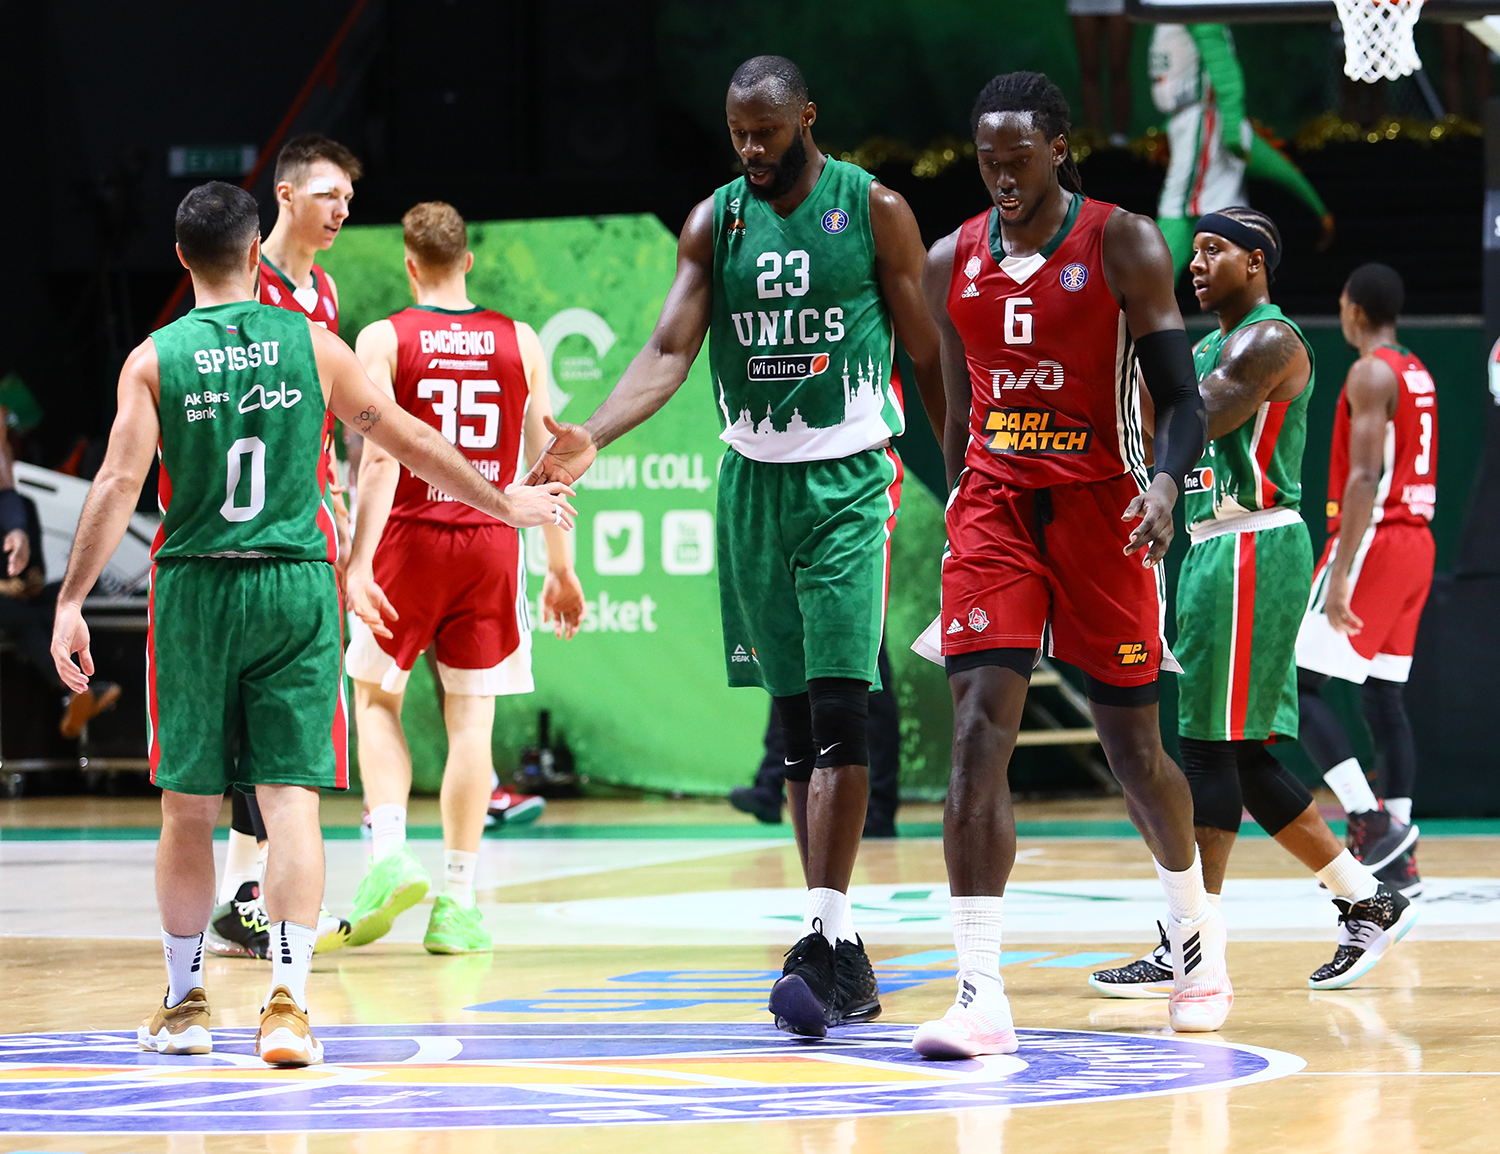 UNICS came back from -21 and started the season with the win against Loko